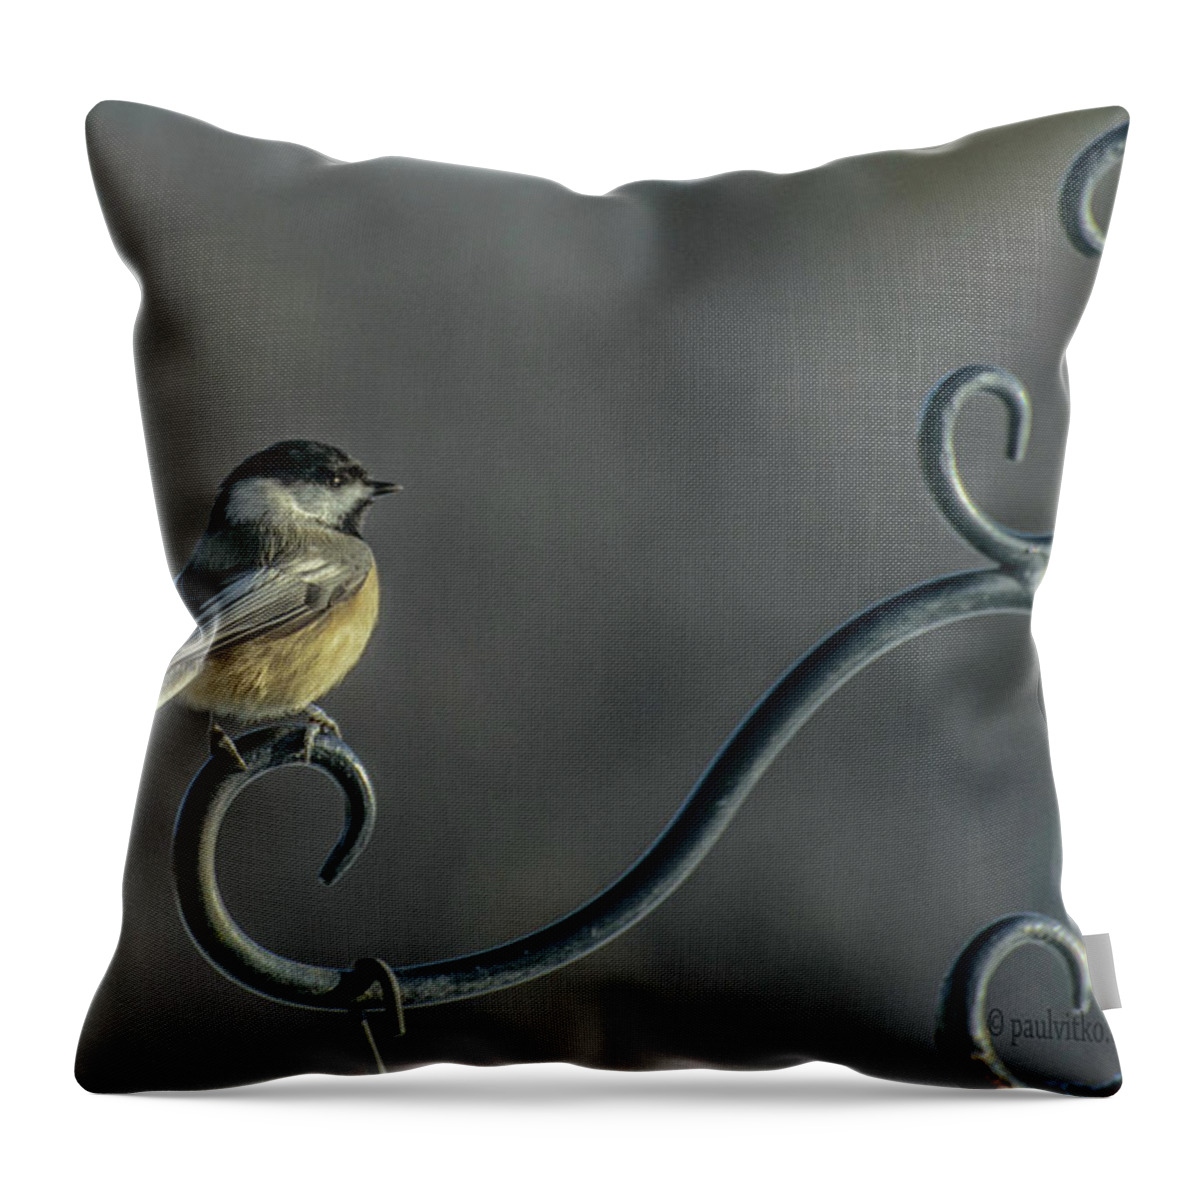  Throw Pillow featuring the photograph Early Morning At The Feeder by Paul Vitko